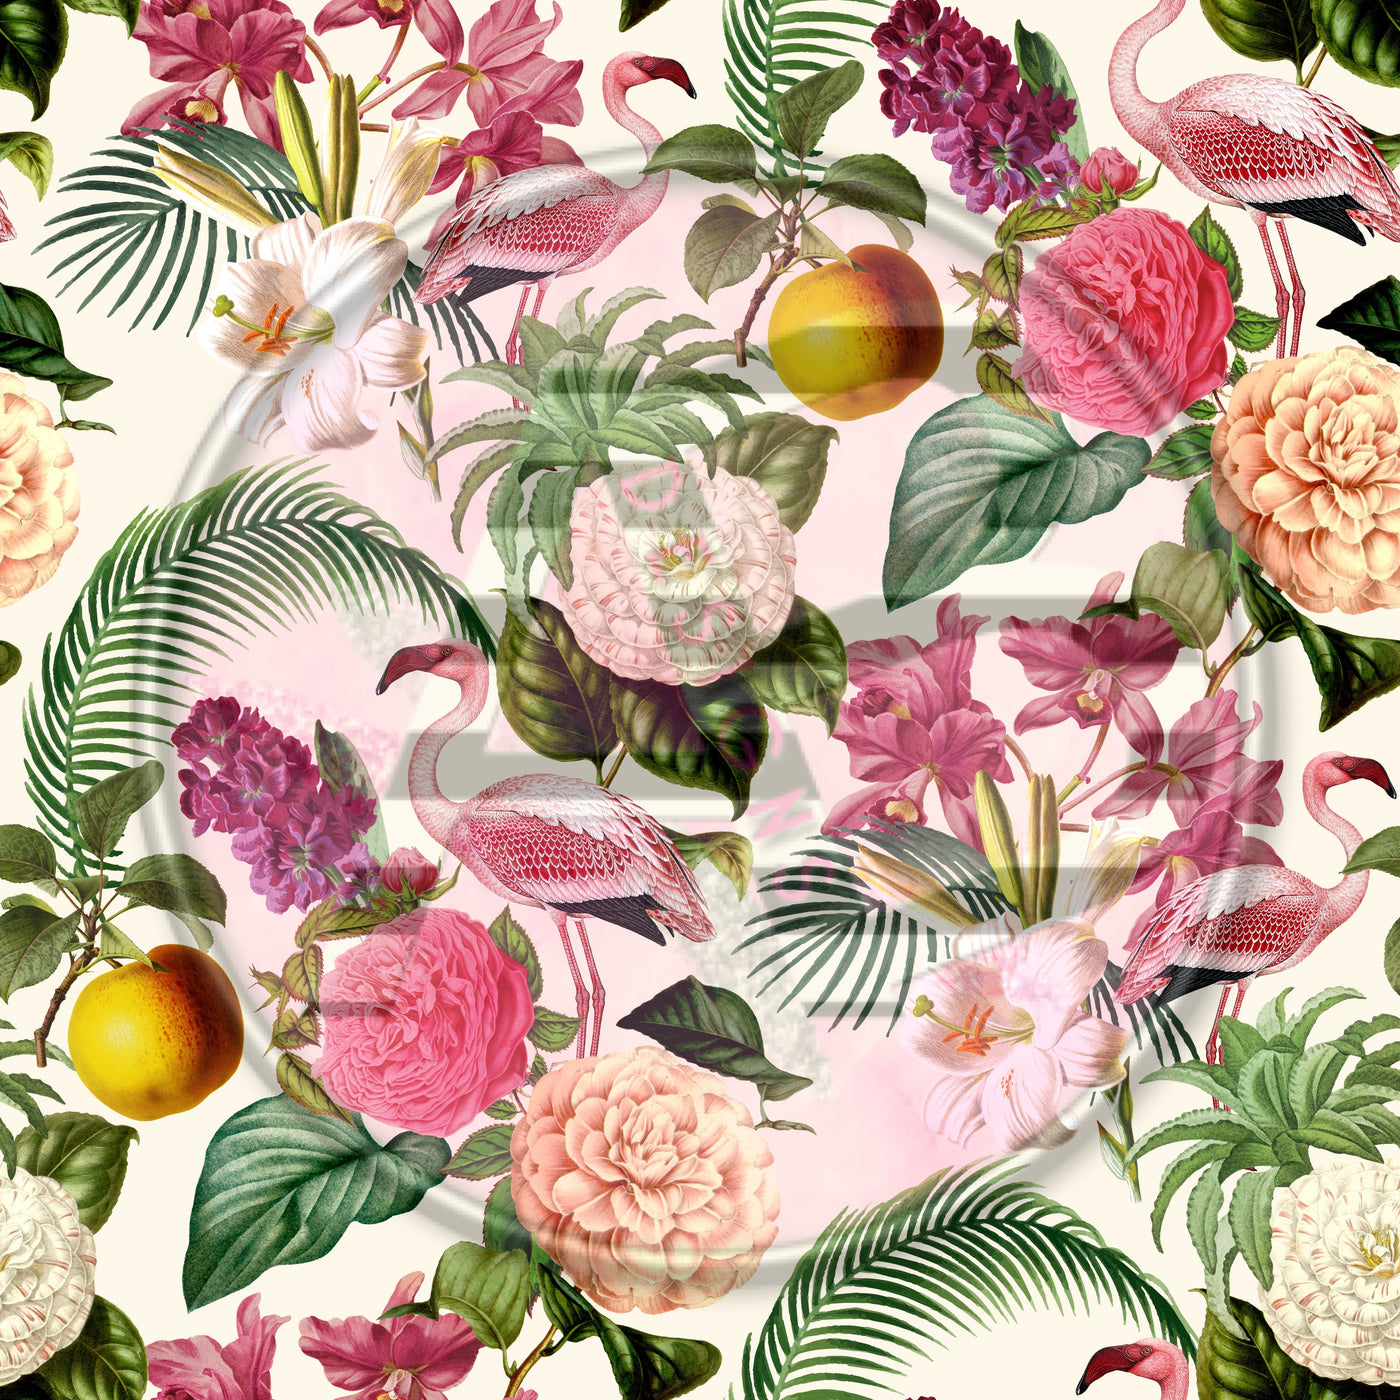 Adhesive Patterned Vinyl - Tropical 1770